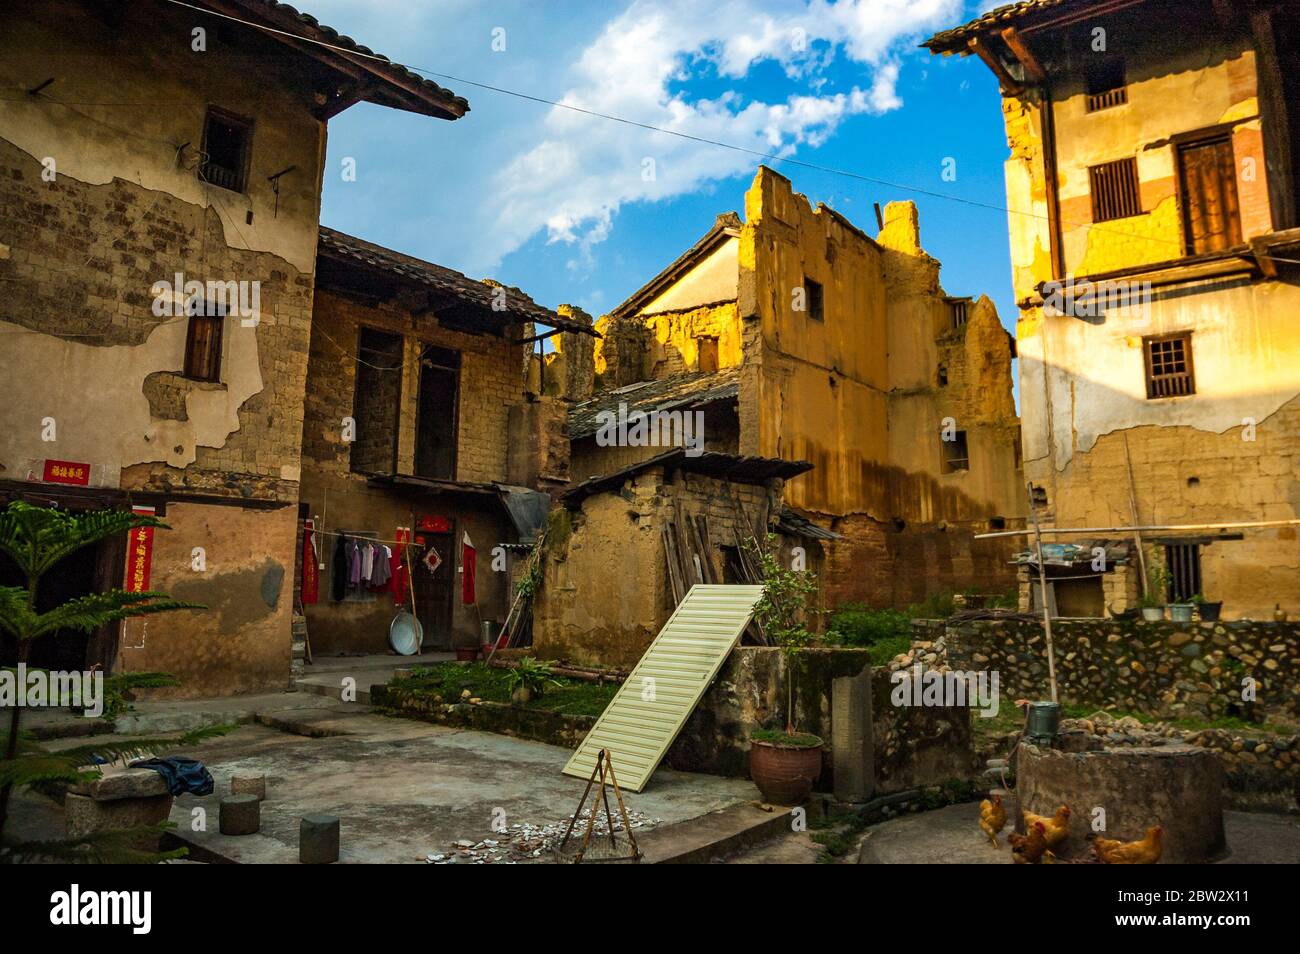 A tulou in Xia Zai Cun Cun village thought to be the oldest remaining tulou in Yongding County. Stock Photo